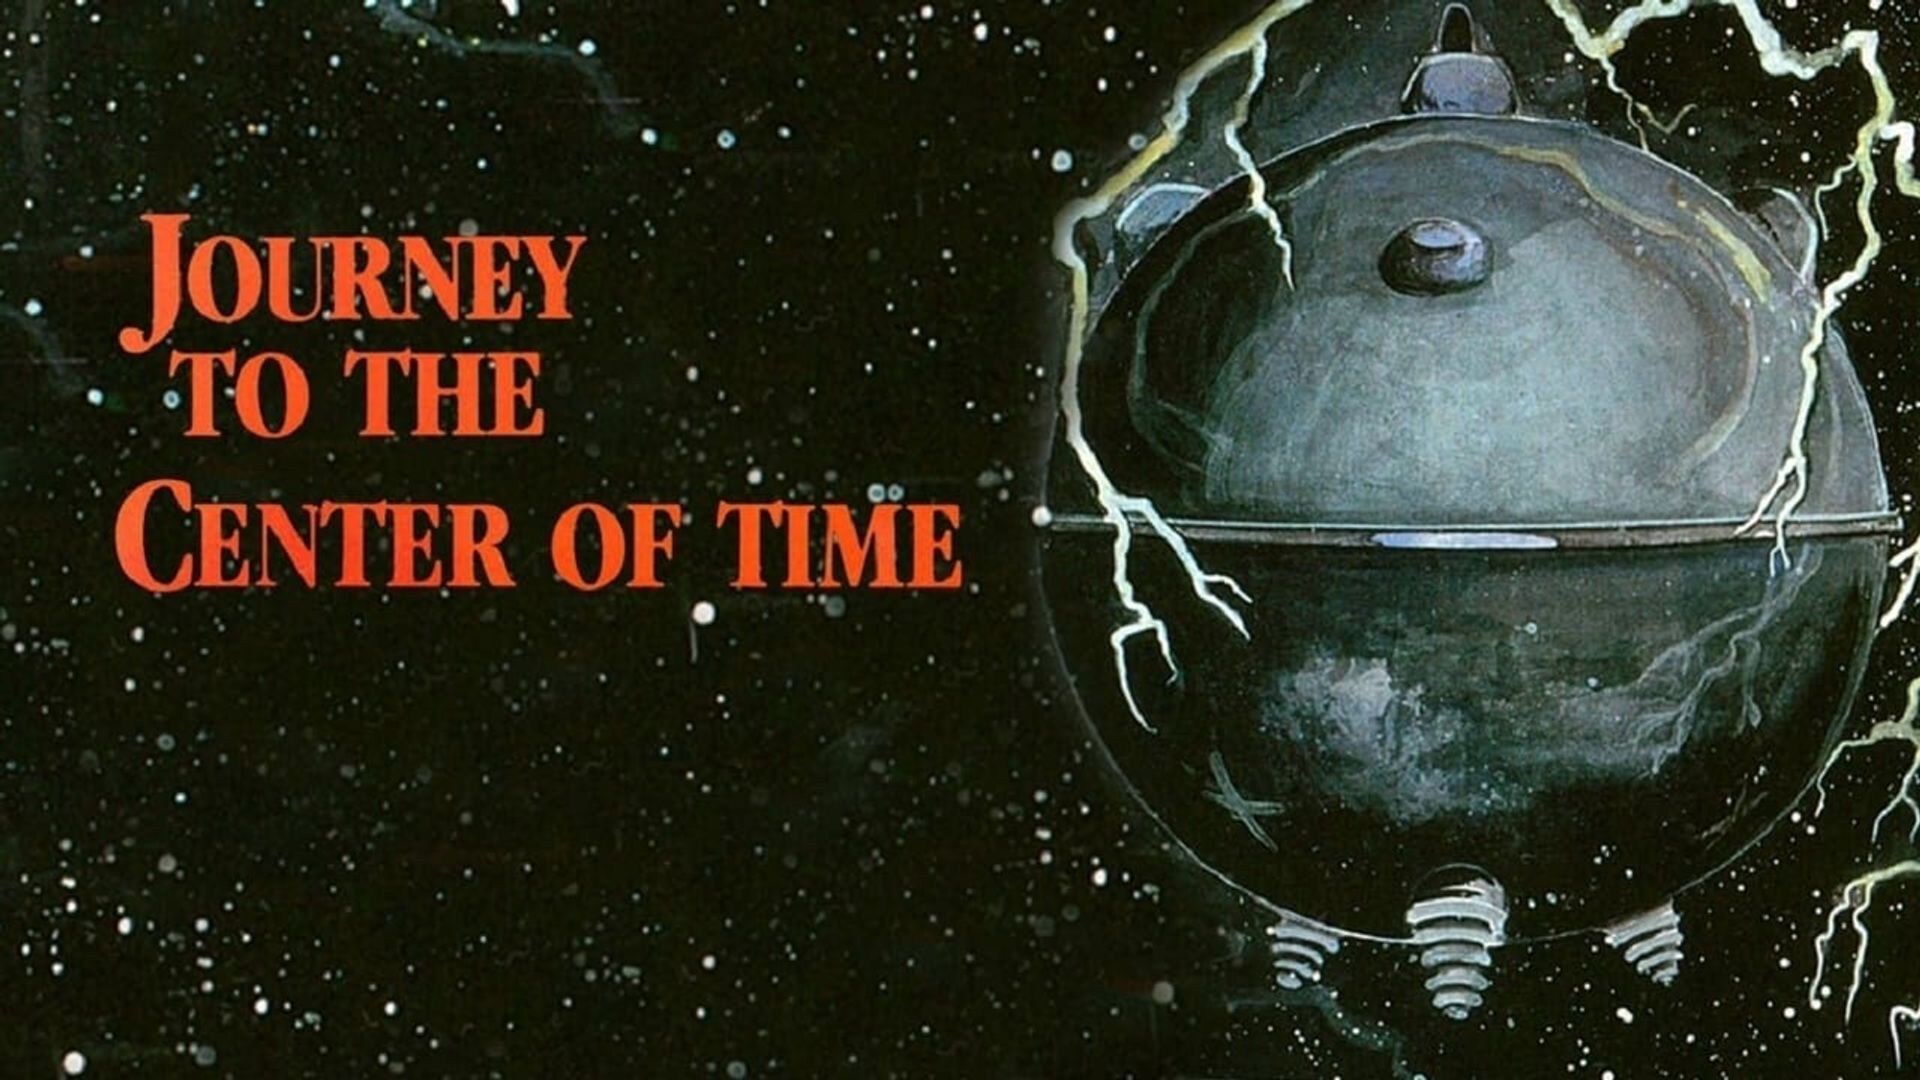 Journey to the Center of Time background